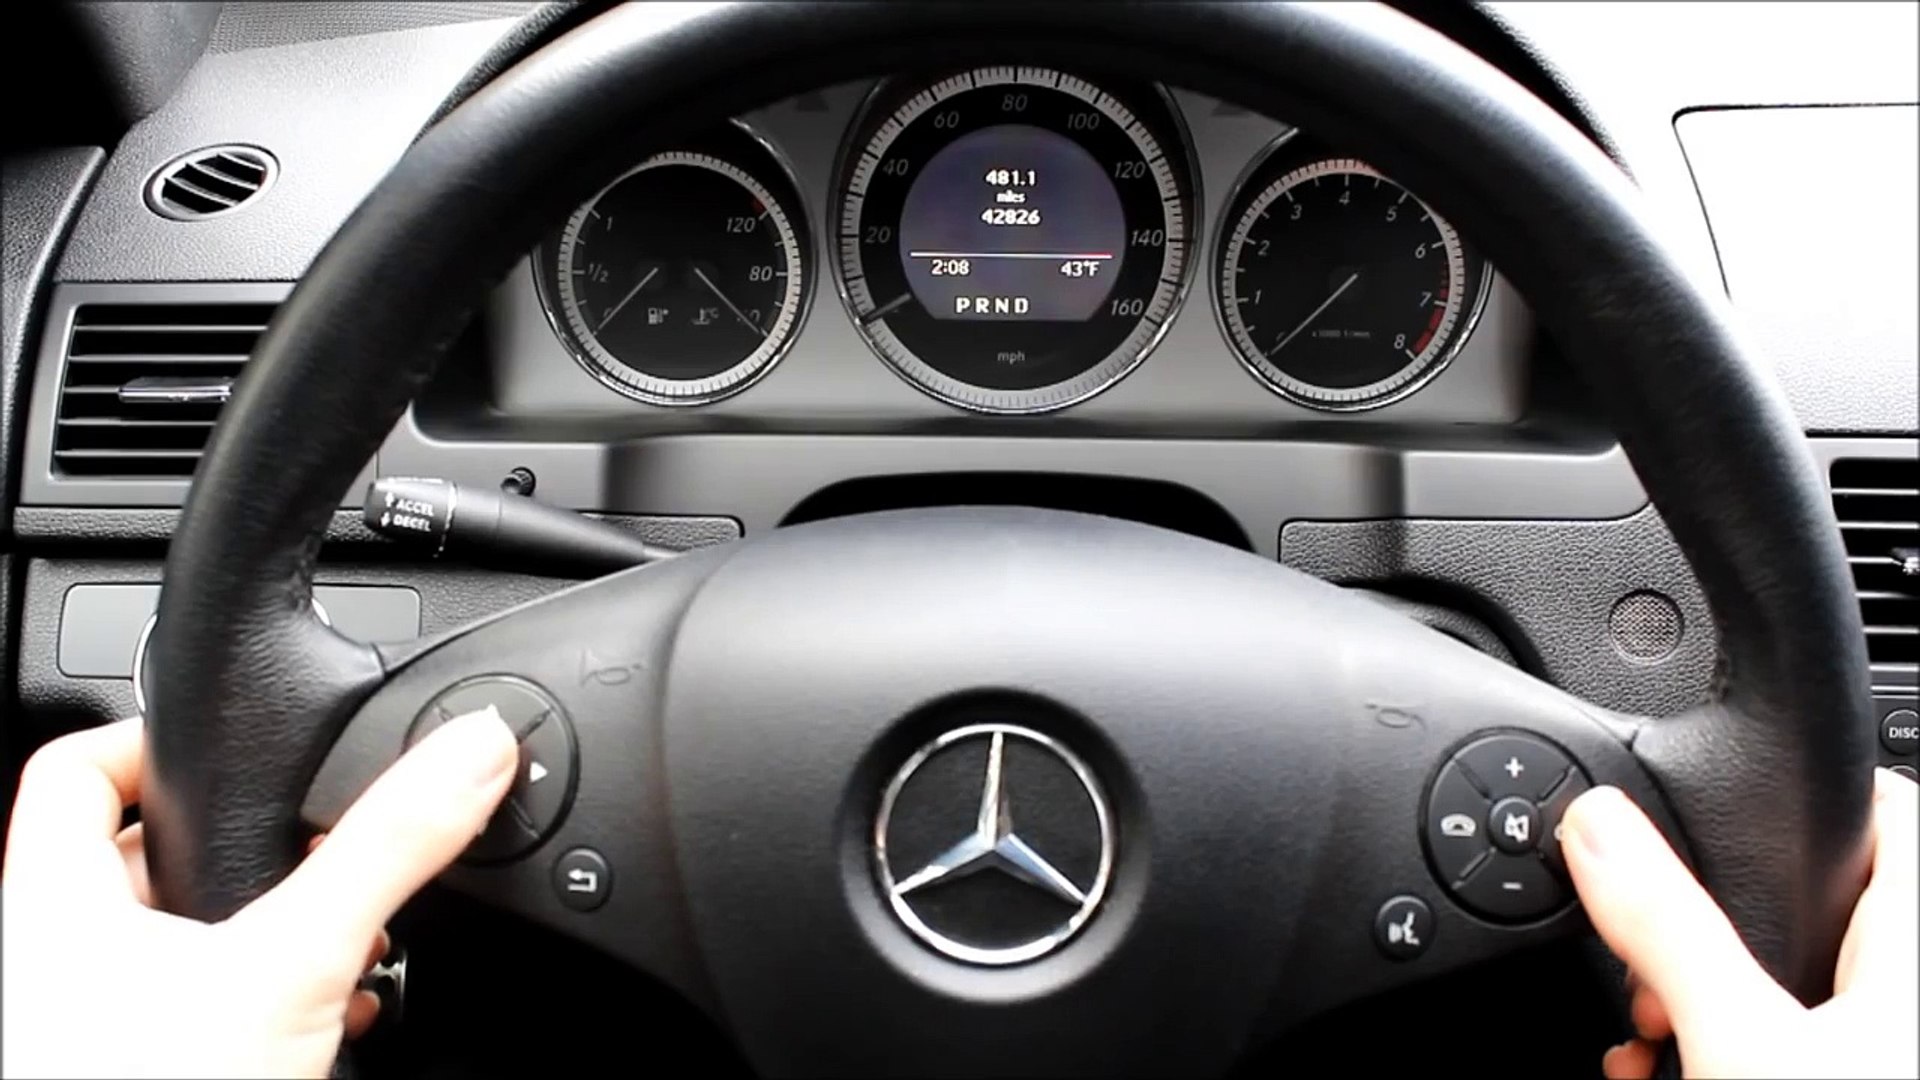 Mercedes-Benz C-Class W204 Service Indicator Reset - video Dailymotion